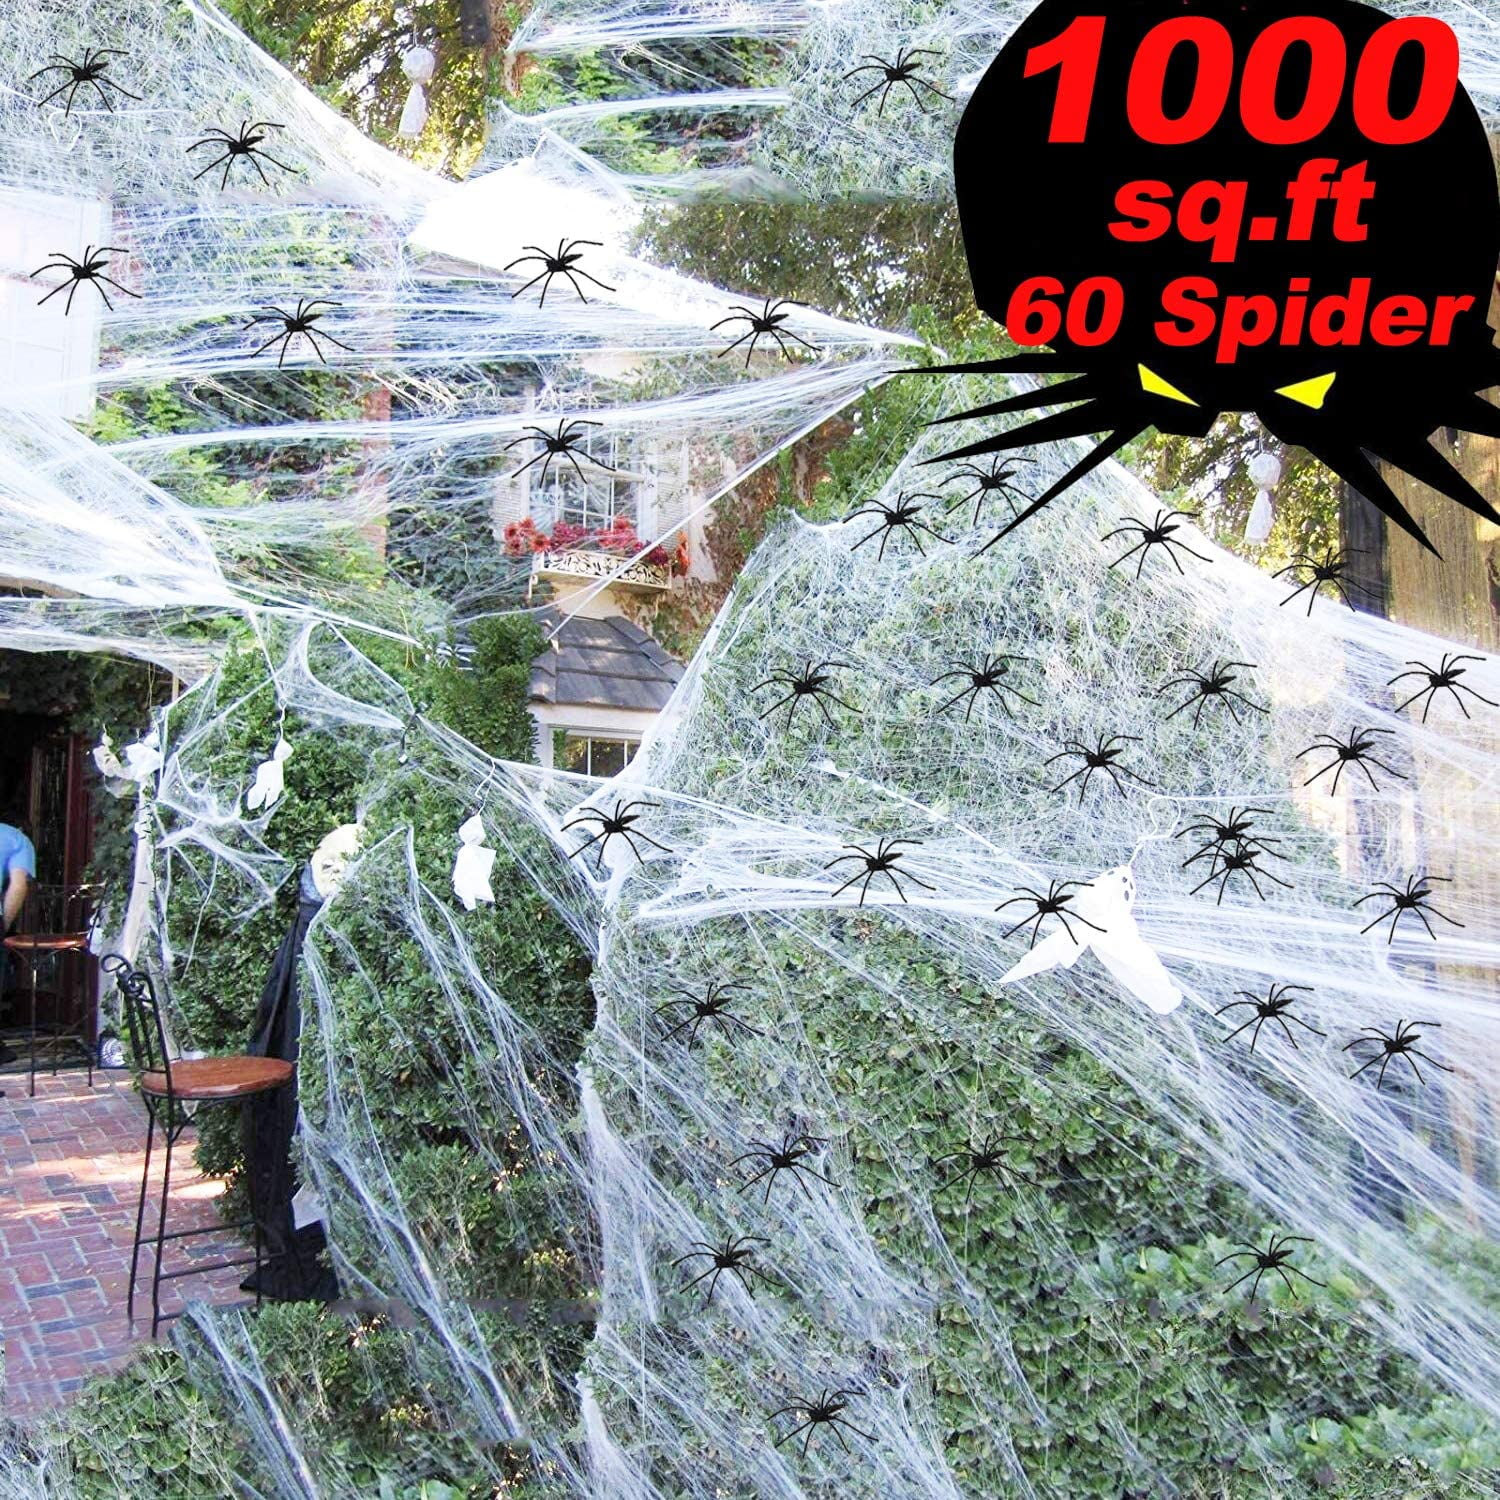 Moon Boat Fake Spider Web Cobweb Halloween Party Decorations Props 1000 sqft with 120 Spiders 